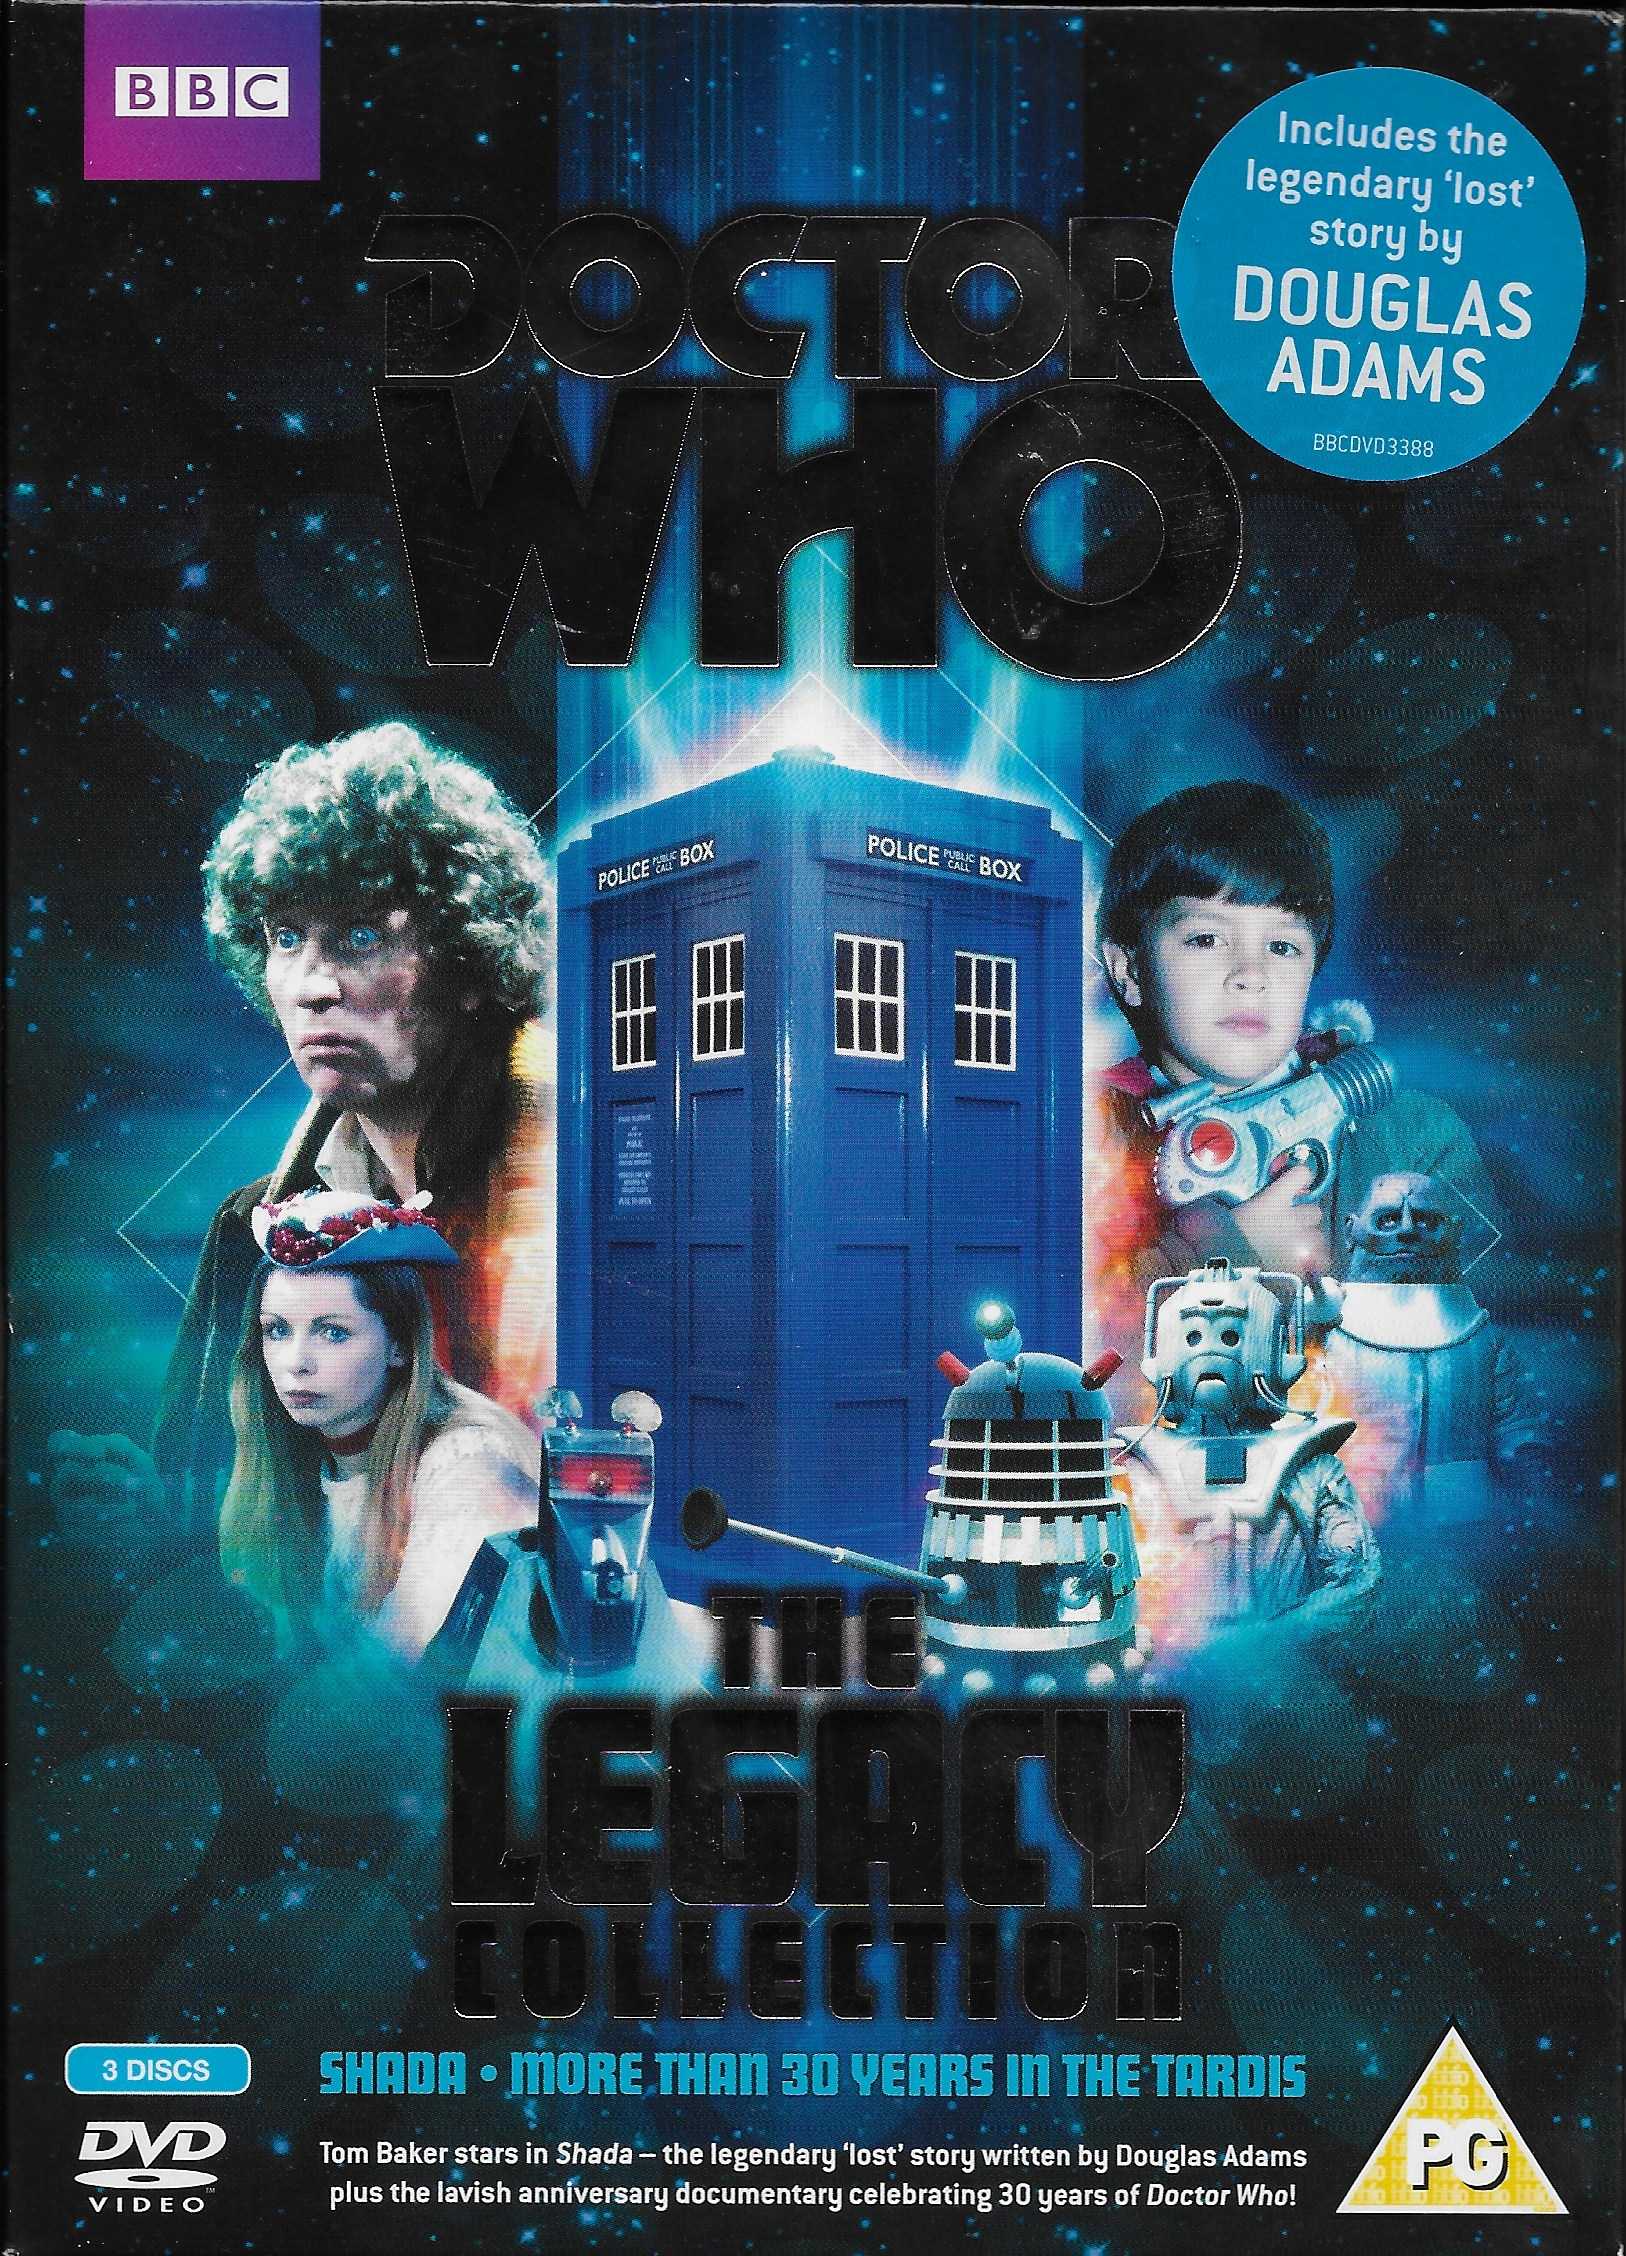 Picture of BBCDVD 3388 Doctor Who - The legacy collection by artist Douglas Adams / Various from the BBC dvds - Records and Tapes library